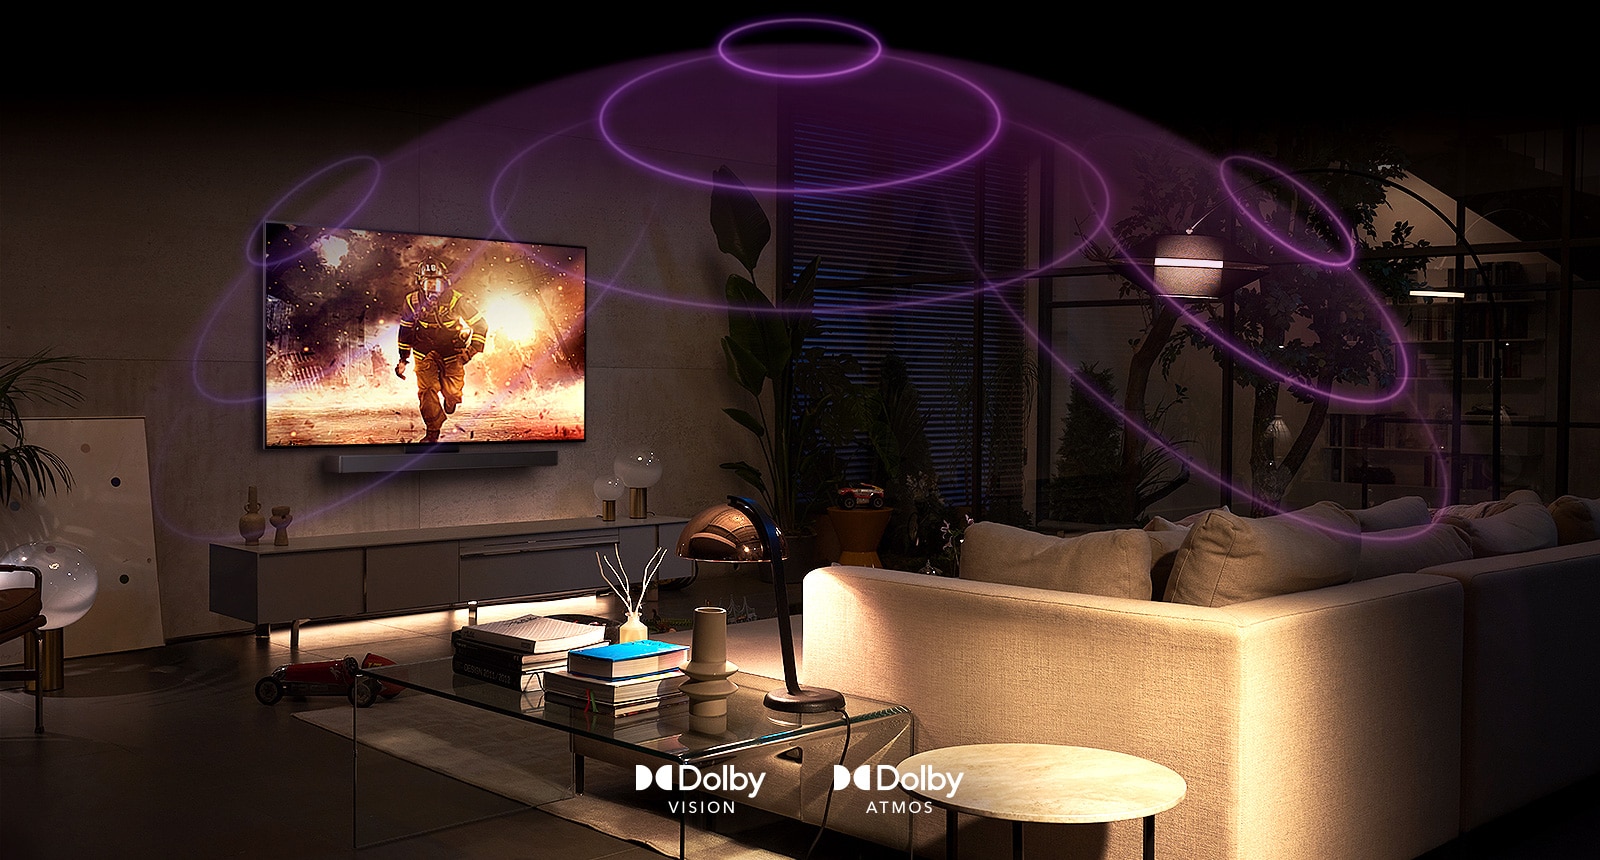 an image of an lg oled tv in a room playing an action movie. sound waves create a dome between the sofa and the tv, depicting immersive spatial audio.